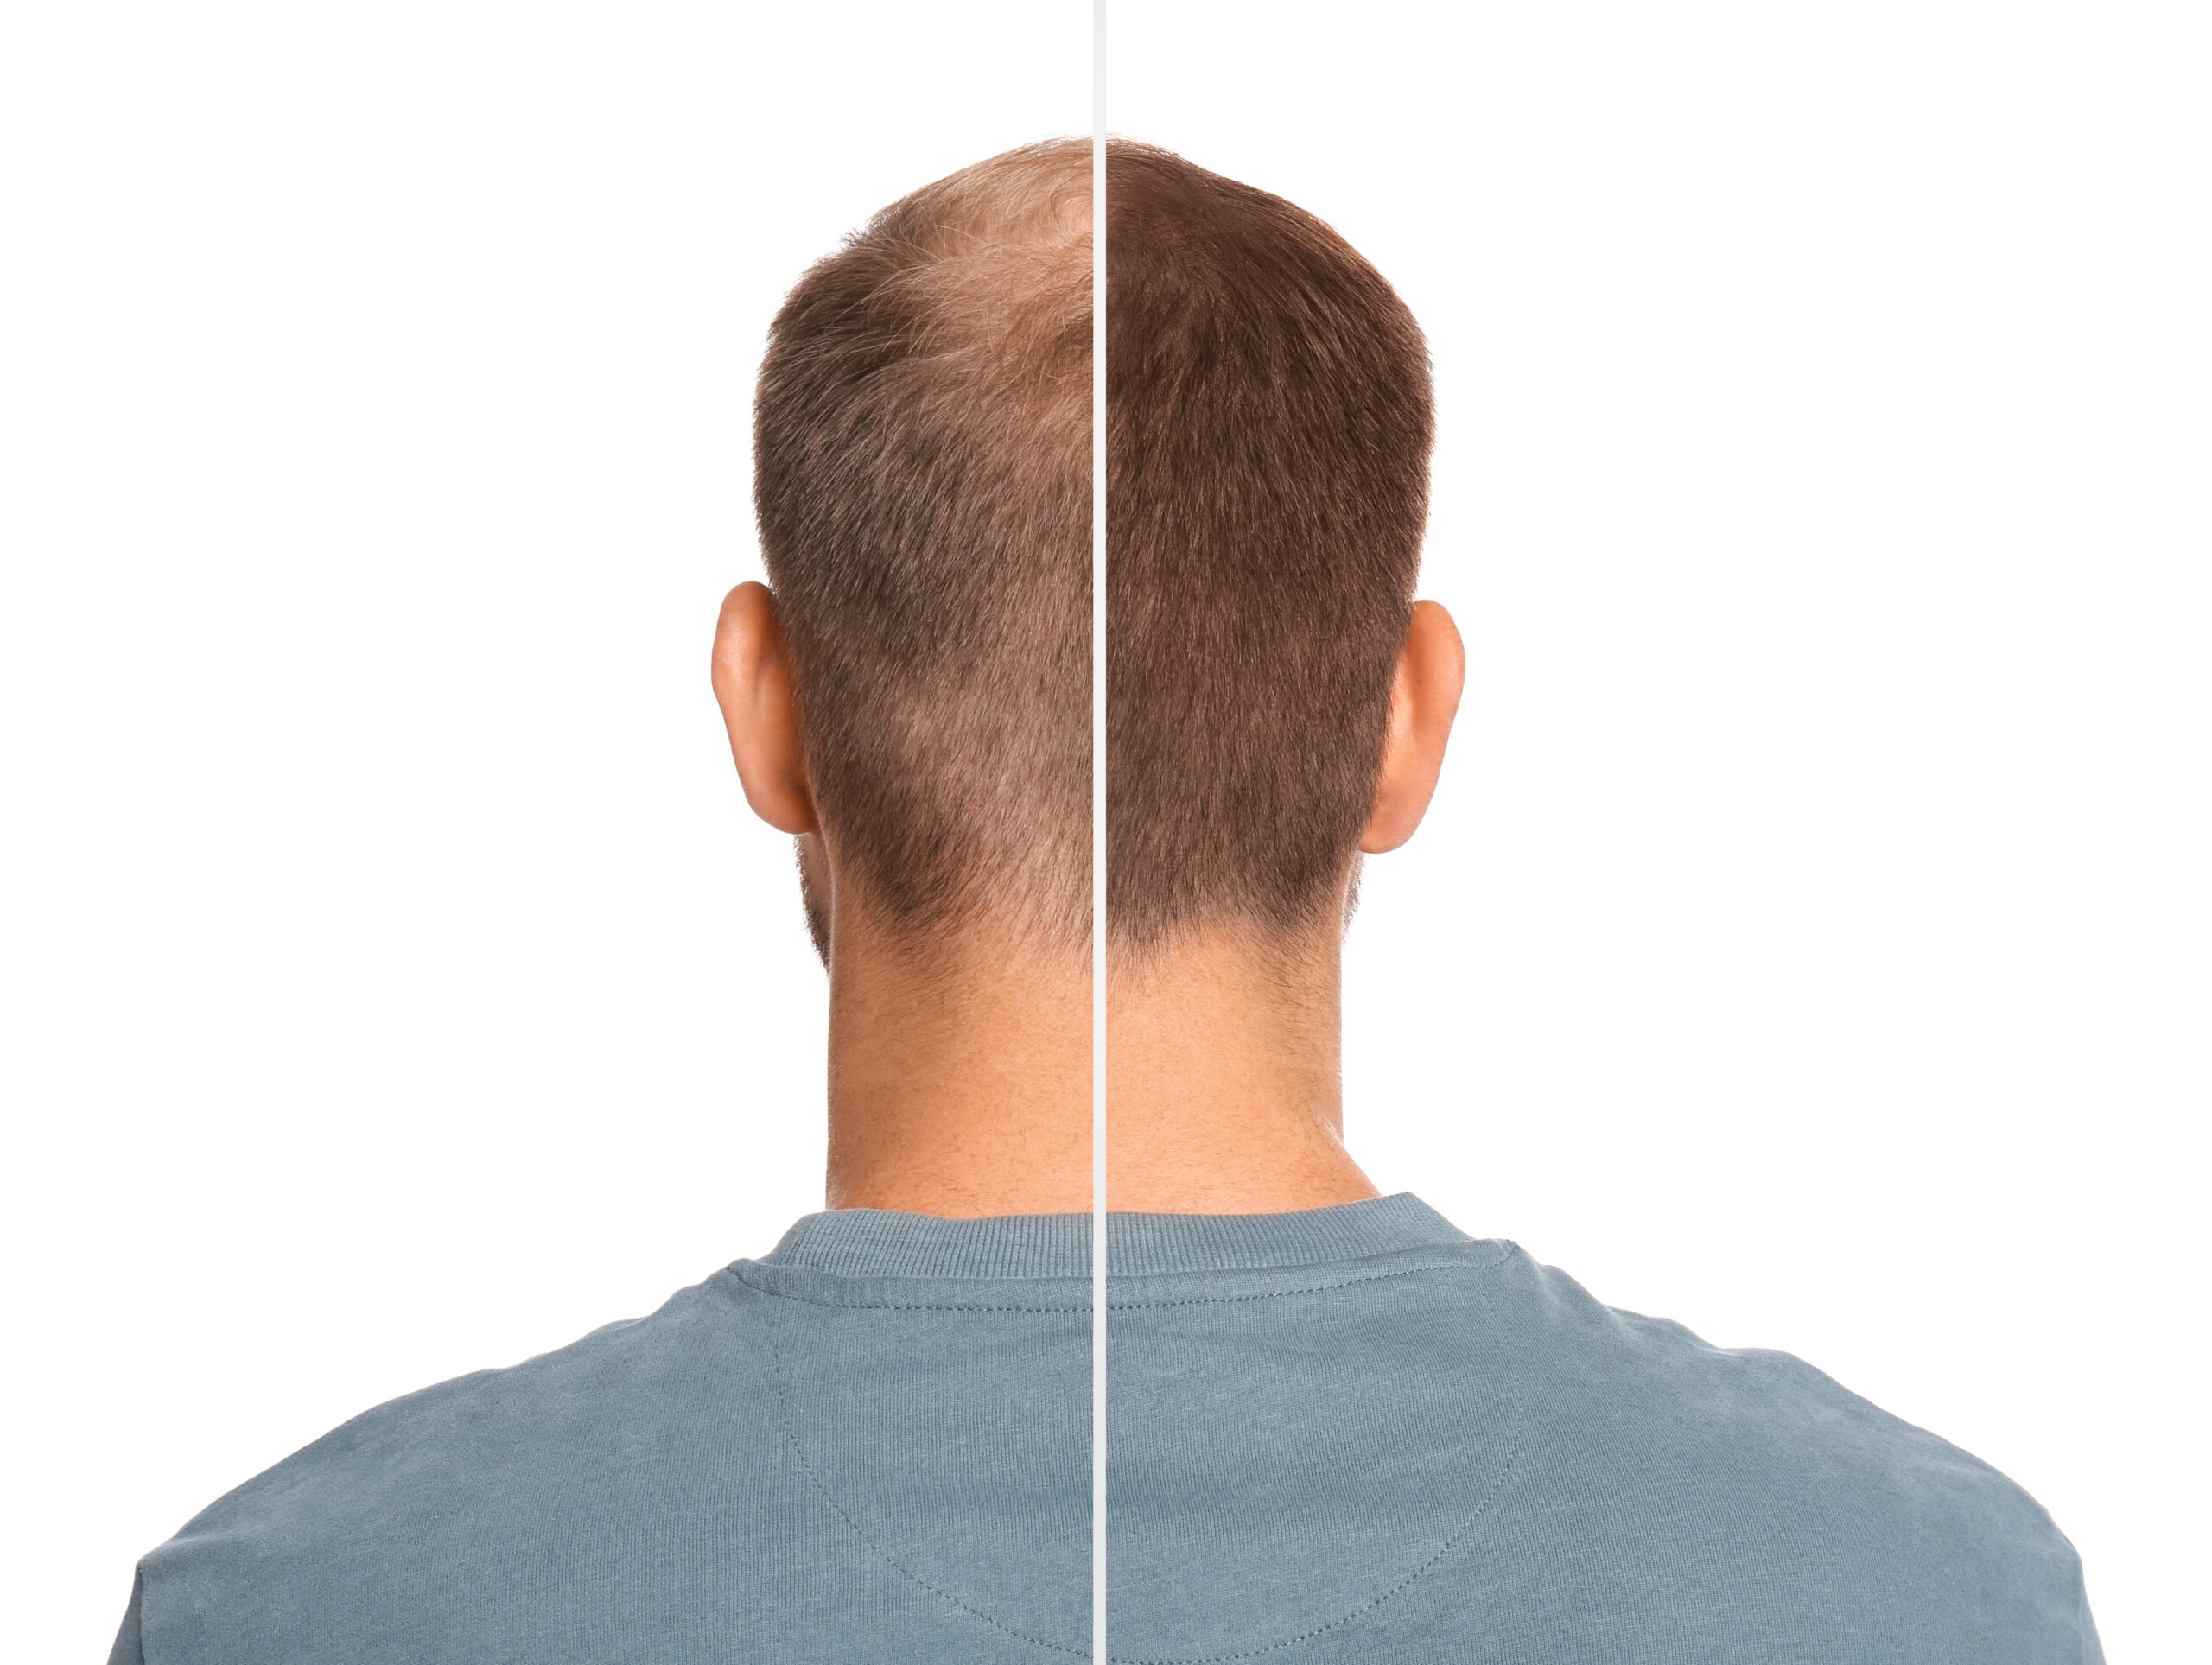 man with hair loss problem before after treatment white background collage visiting trichologist scaled